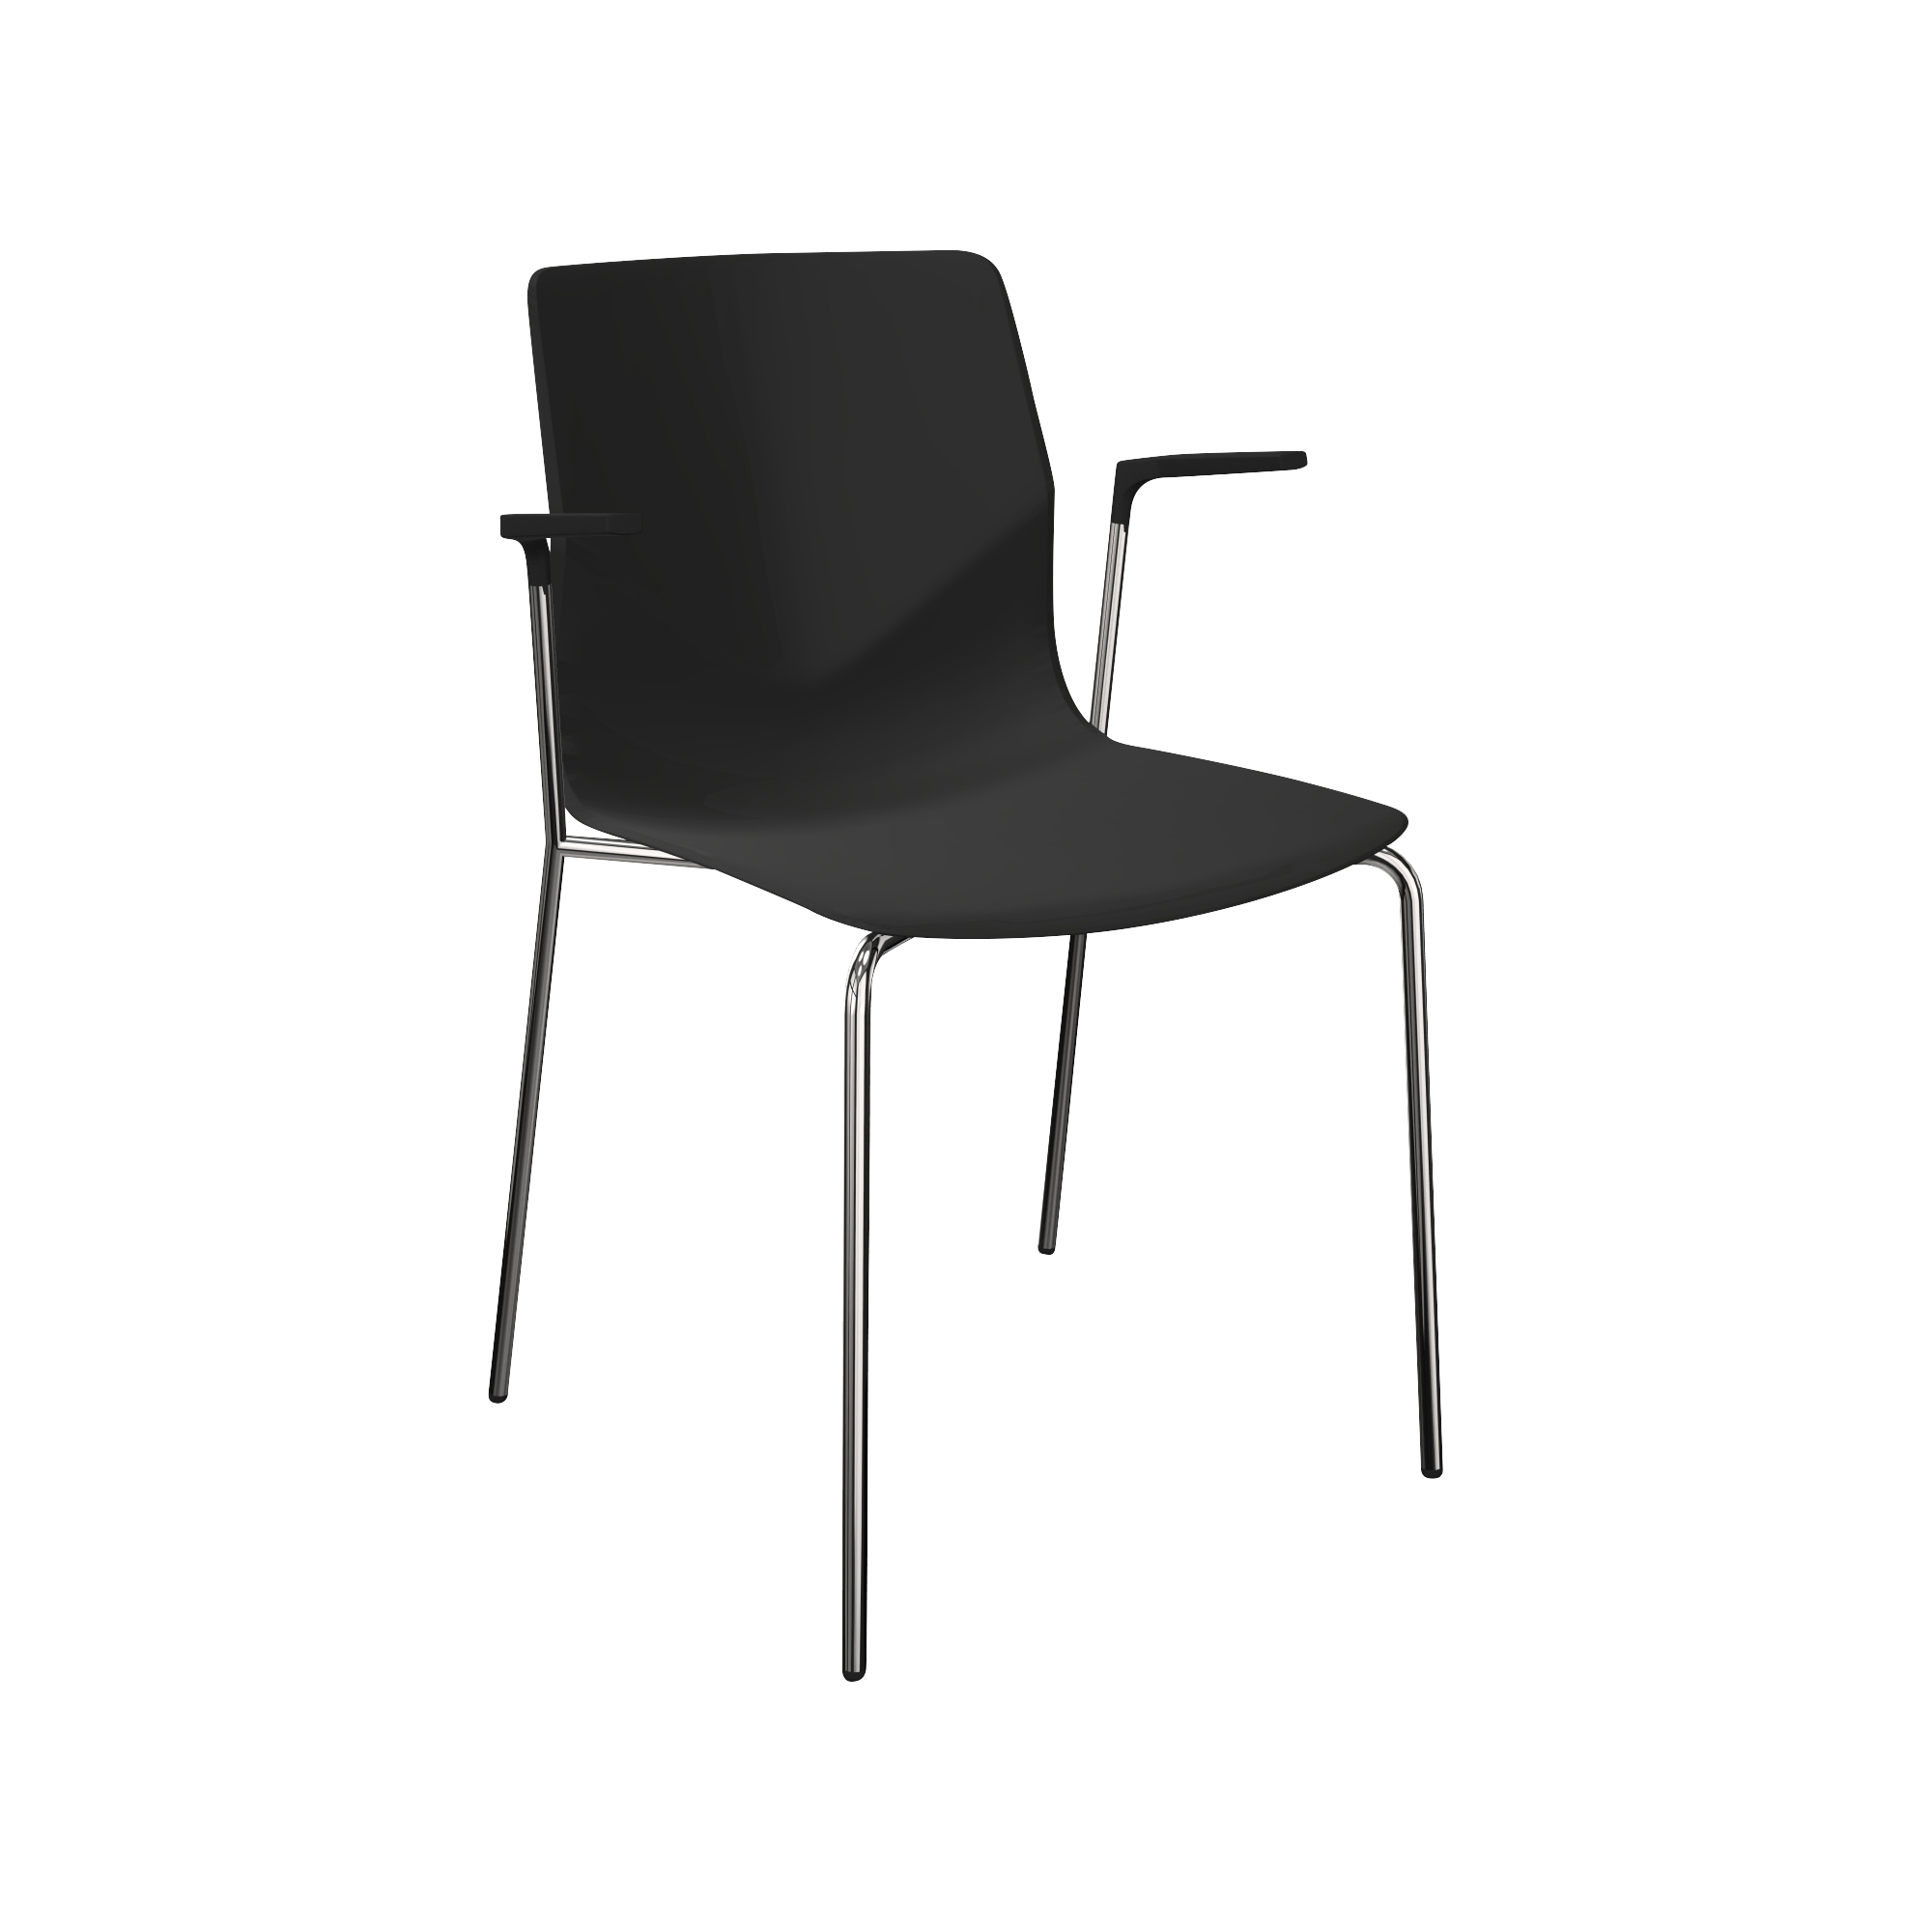 A black chair with a chrome frame and legs